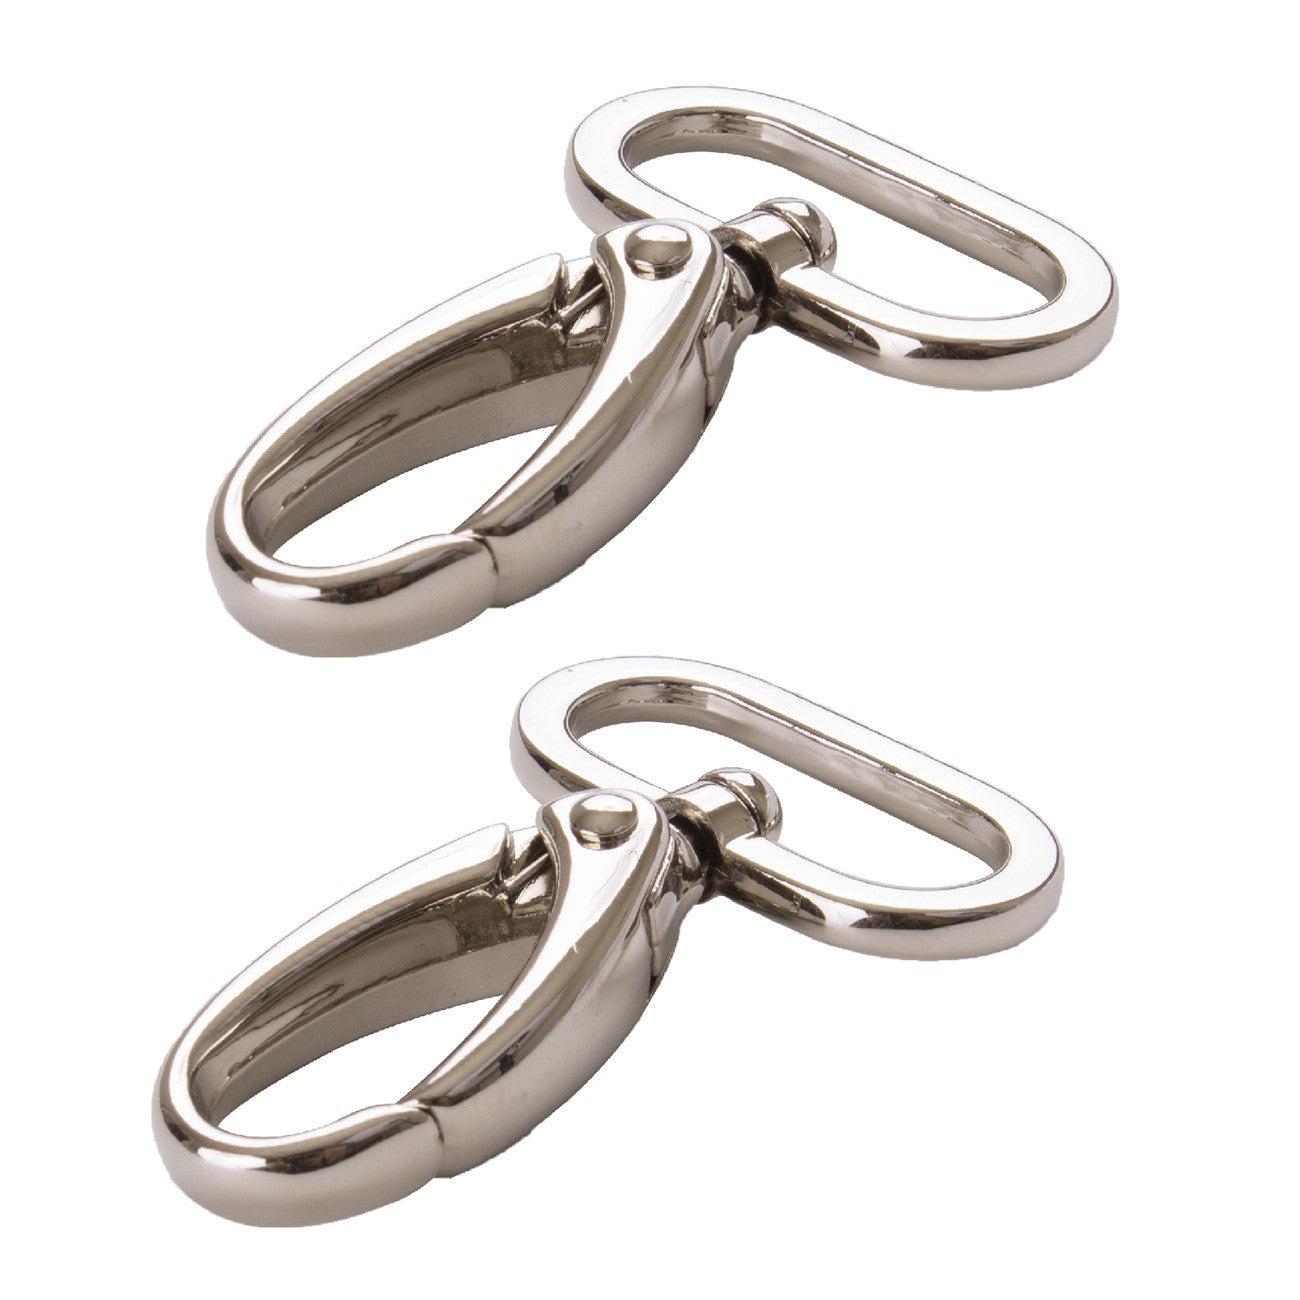 Swivel Hook 1in Nickel Set of Two-By Annie.com-My Favorite Quilt Store